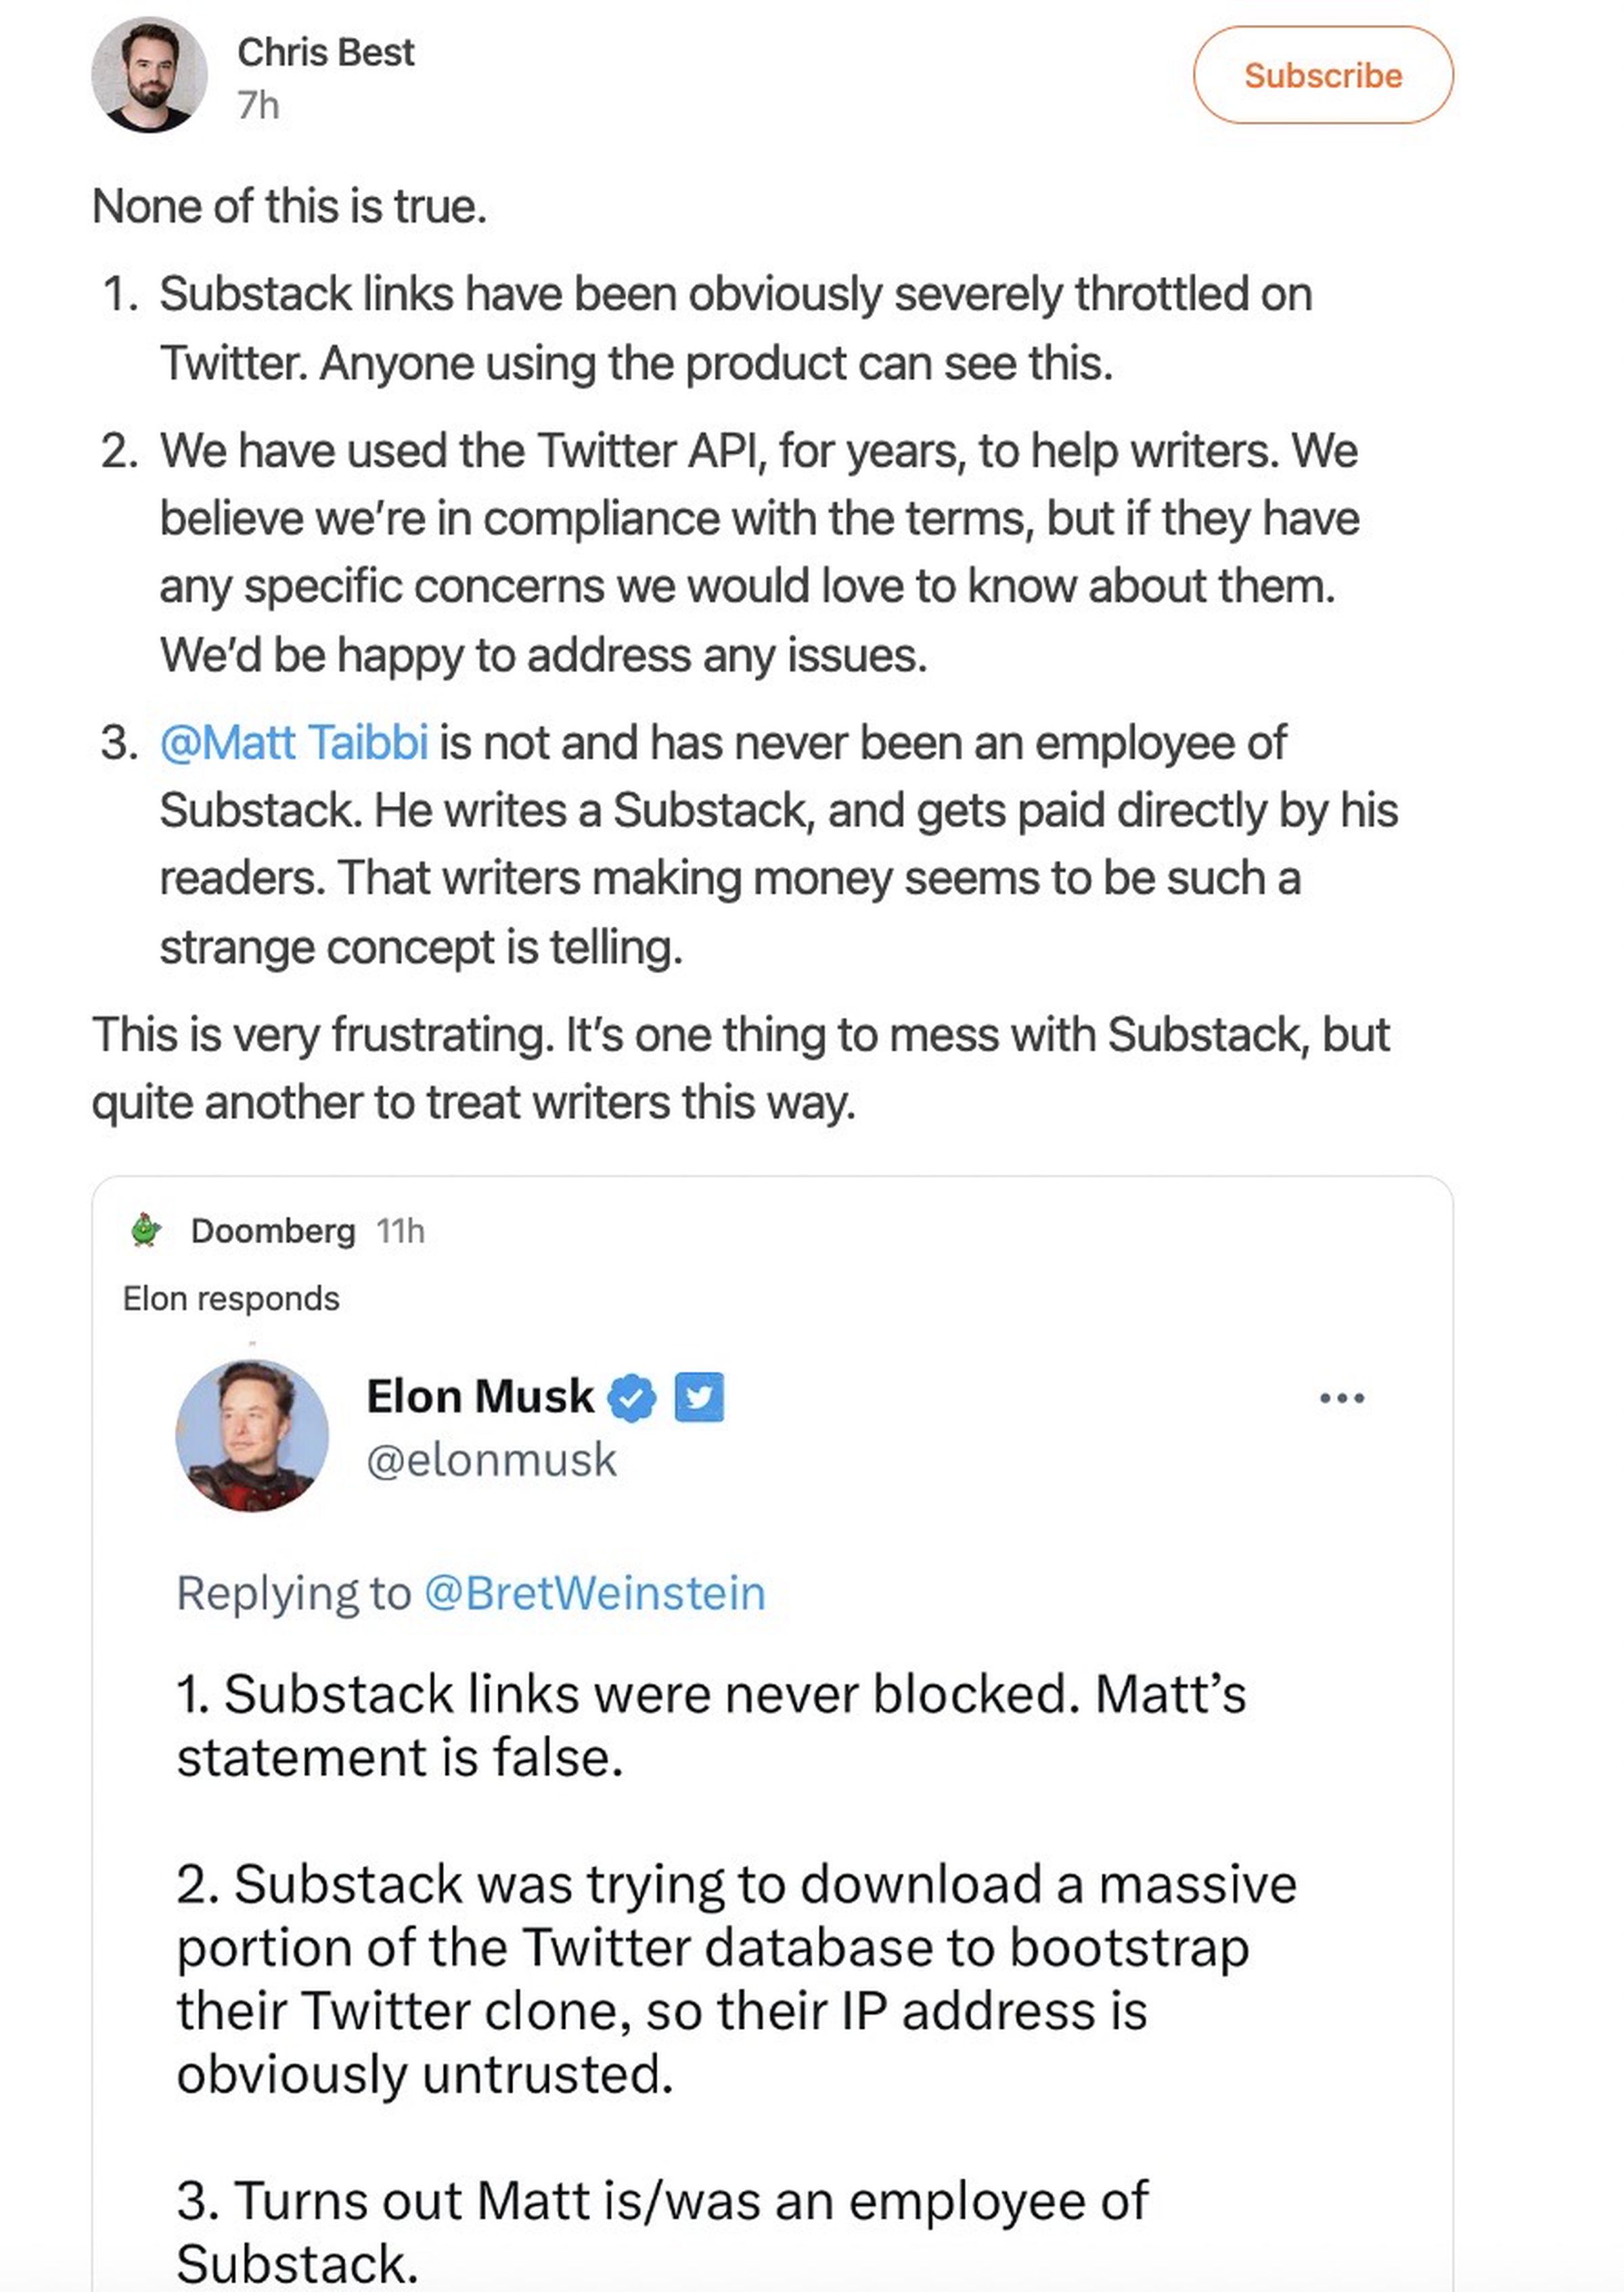 A screenshot of a Substack Notes post from CEO Chris Best, responding to a tweet from Elon Musk.